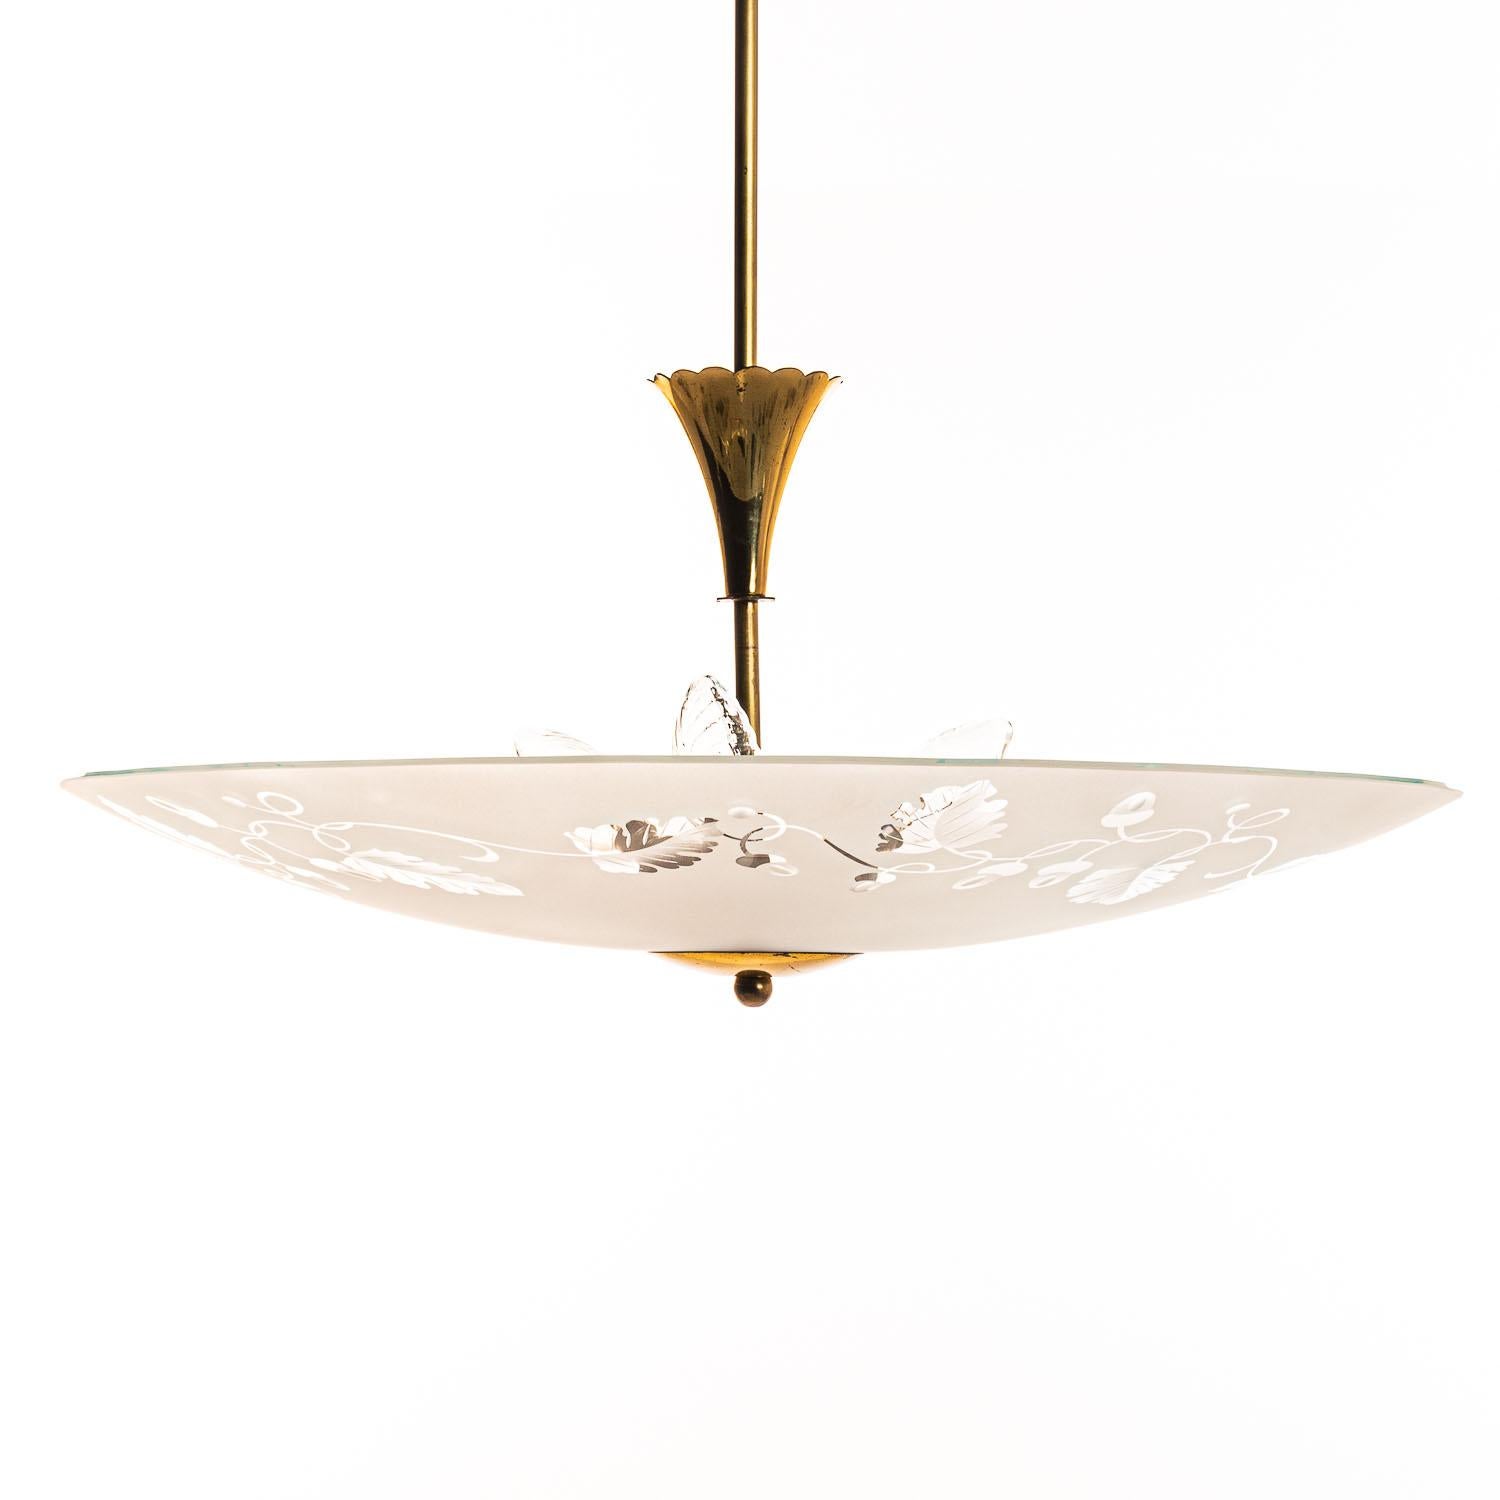 Stylish piece consisting of a brass frame and one glass reflector with a unique floral etching. The etching of the dish makes it seem like the glass has a sloping rim. 
In the center 3 electrical E27 sockets. A unique feature with a soft light.